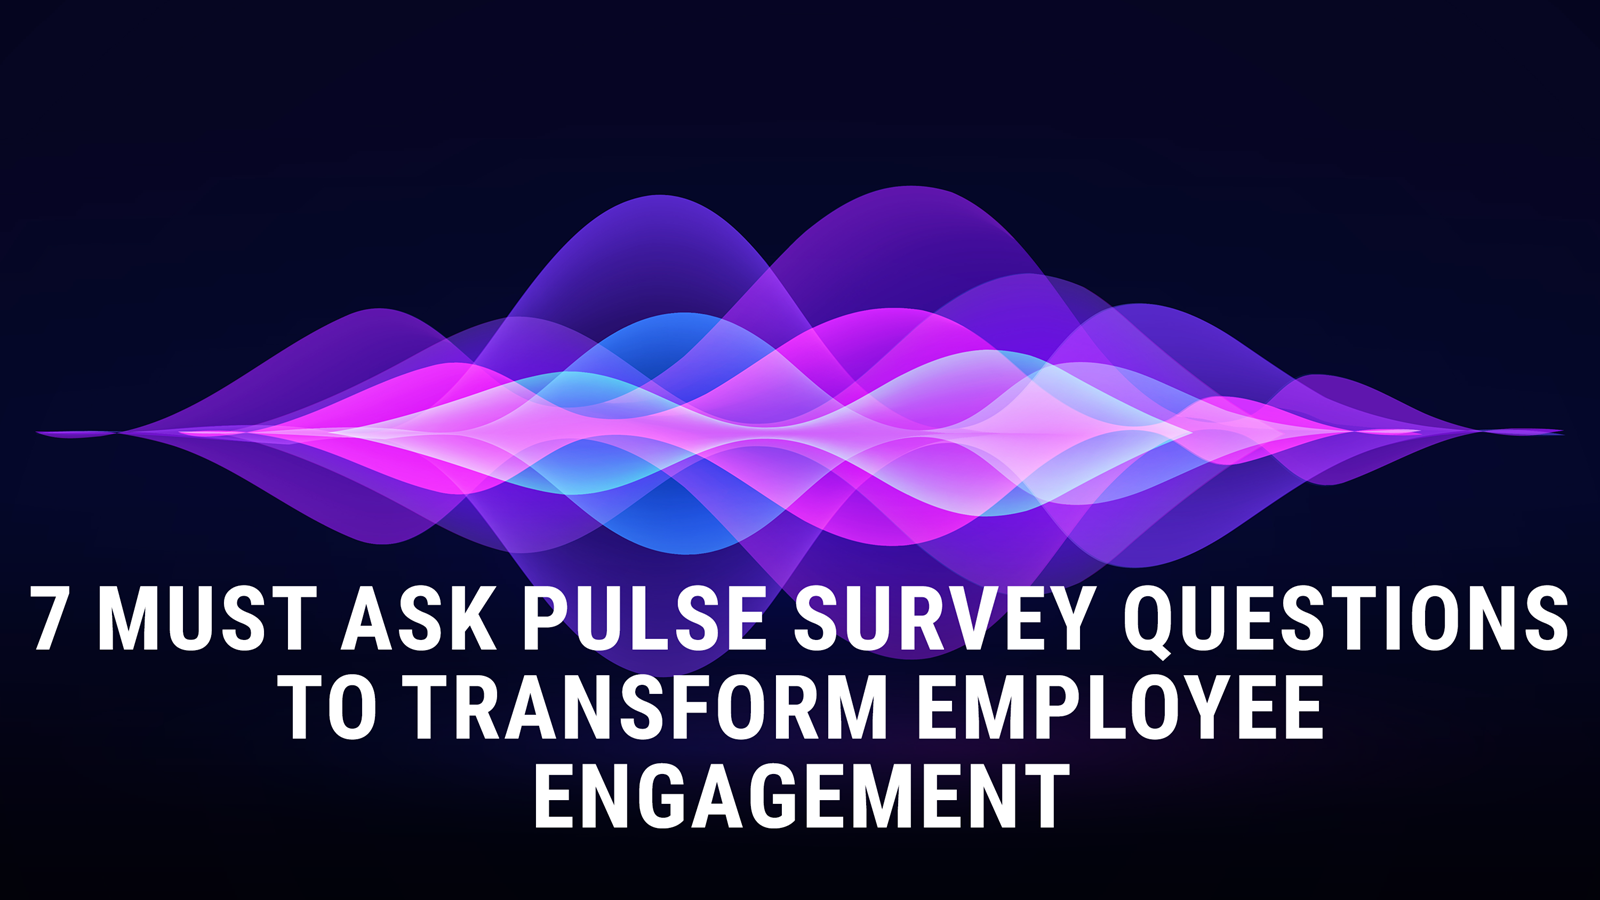 Pulse survey to transform employee engagement guide cover